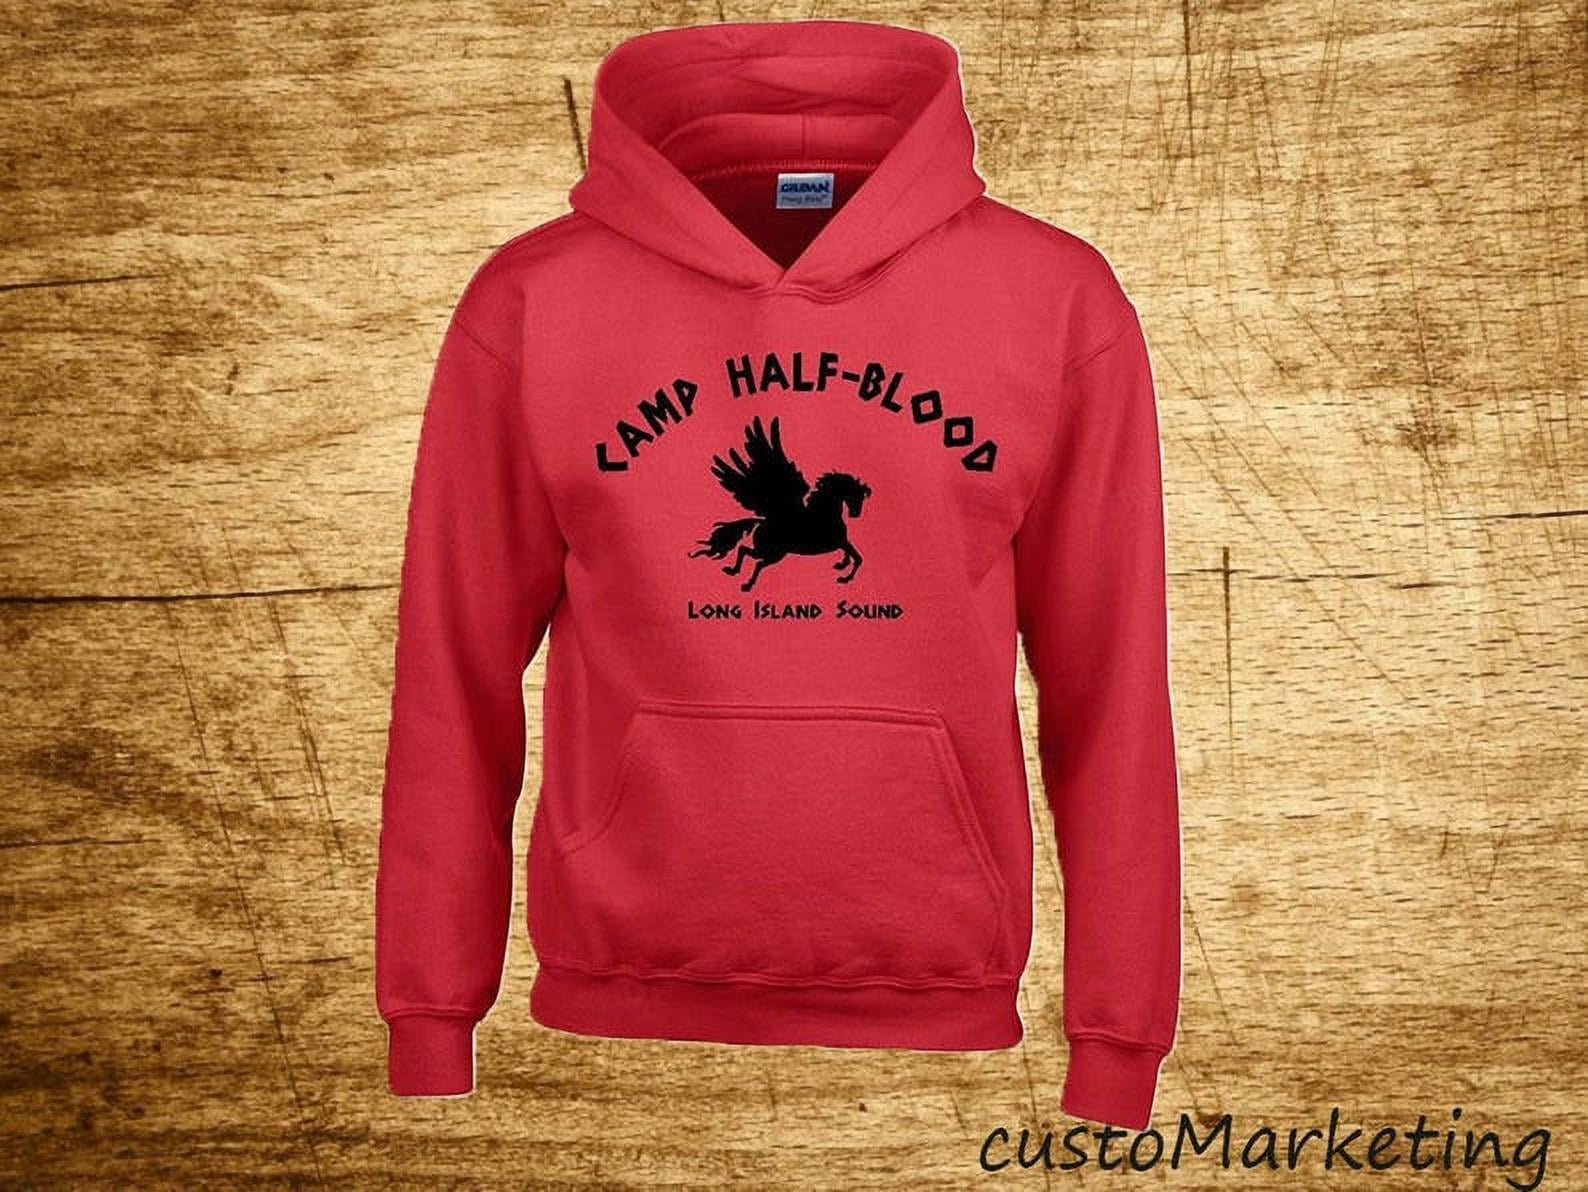 Camp Half Blood Long Island Sound Shortsleeve T-shirt | Available in Adult  Unisex | Women's | Kids Sizes